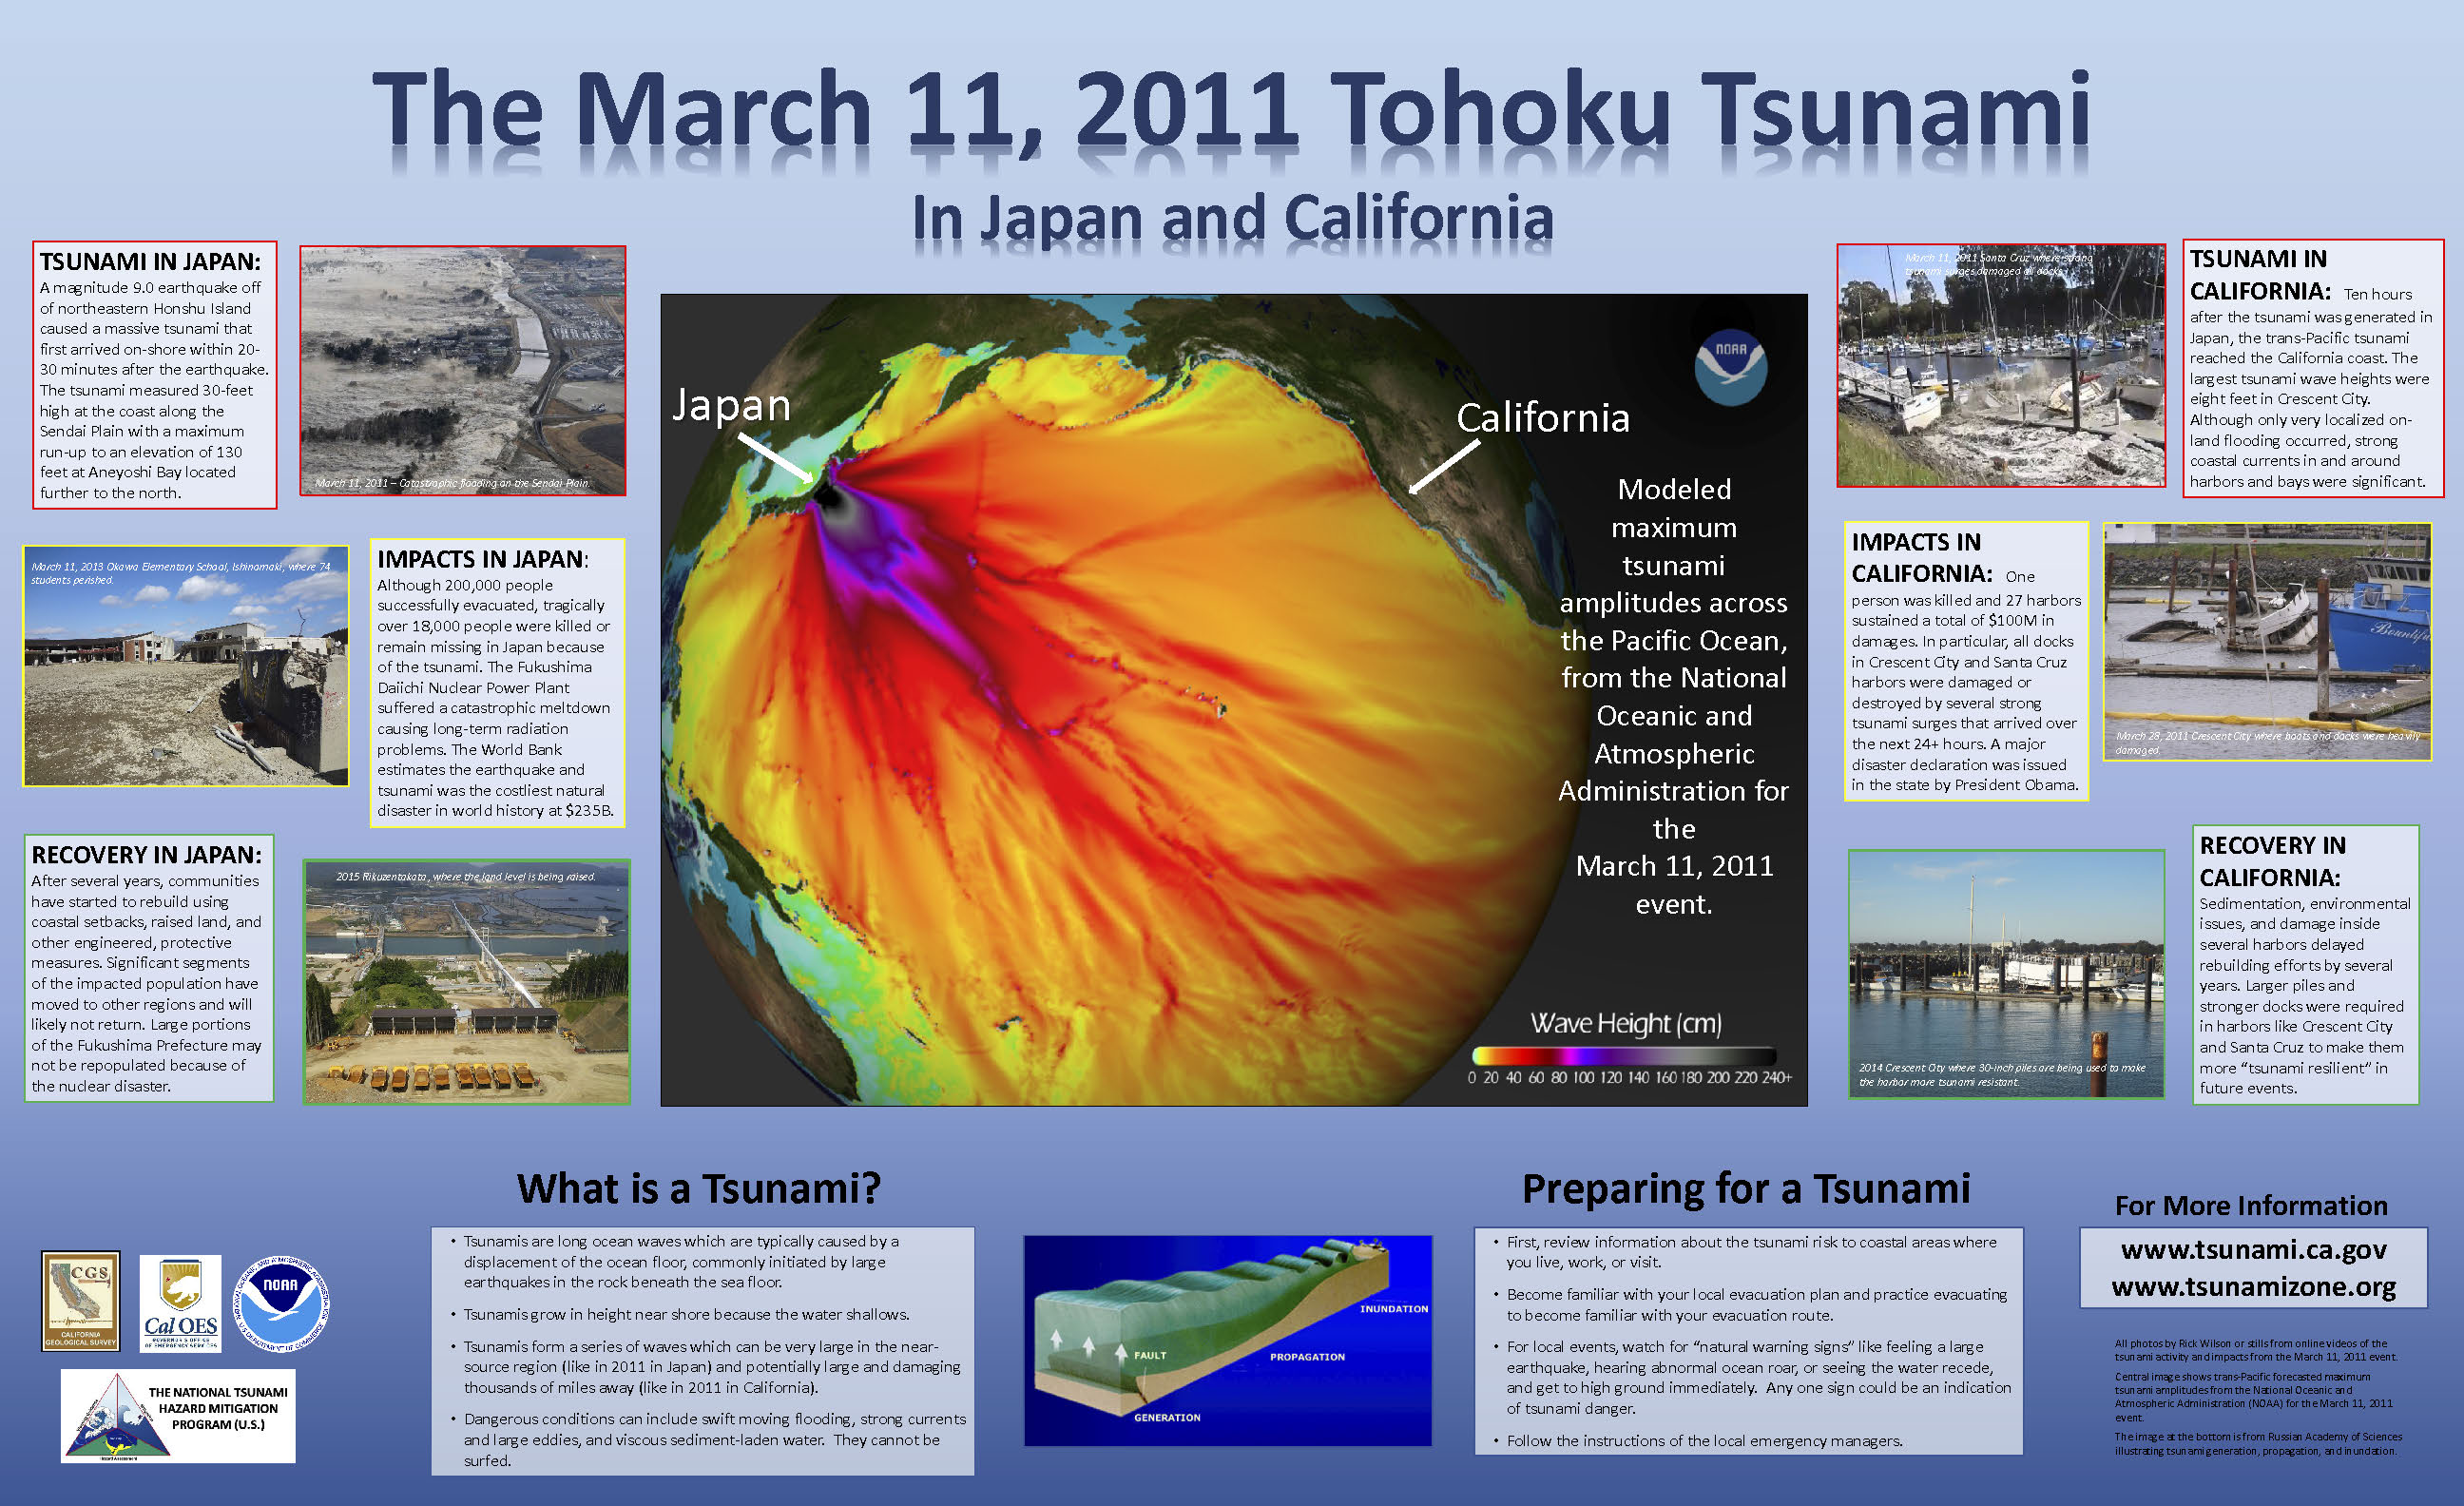 There is a map of the Pacific Ocean that shows a tsunami wave height model where warmer colors represent higher waves that in places there are cooler colors. There are photos from the tsunami, tsunami impacts, and recovery in Japan and California. There is an illustration of what a tsunami looks like when viewed from the side.